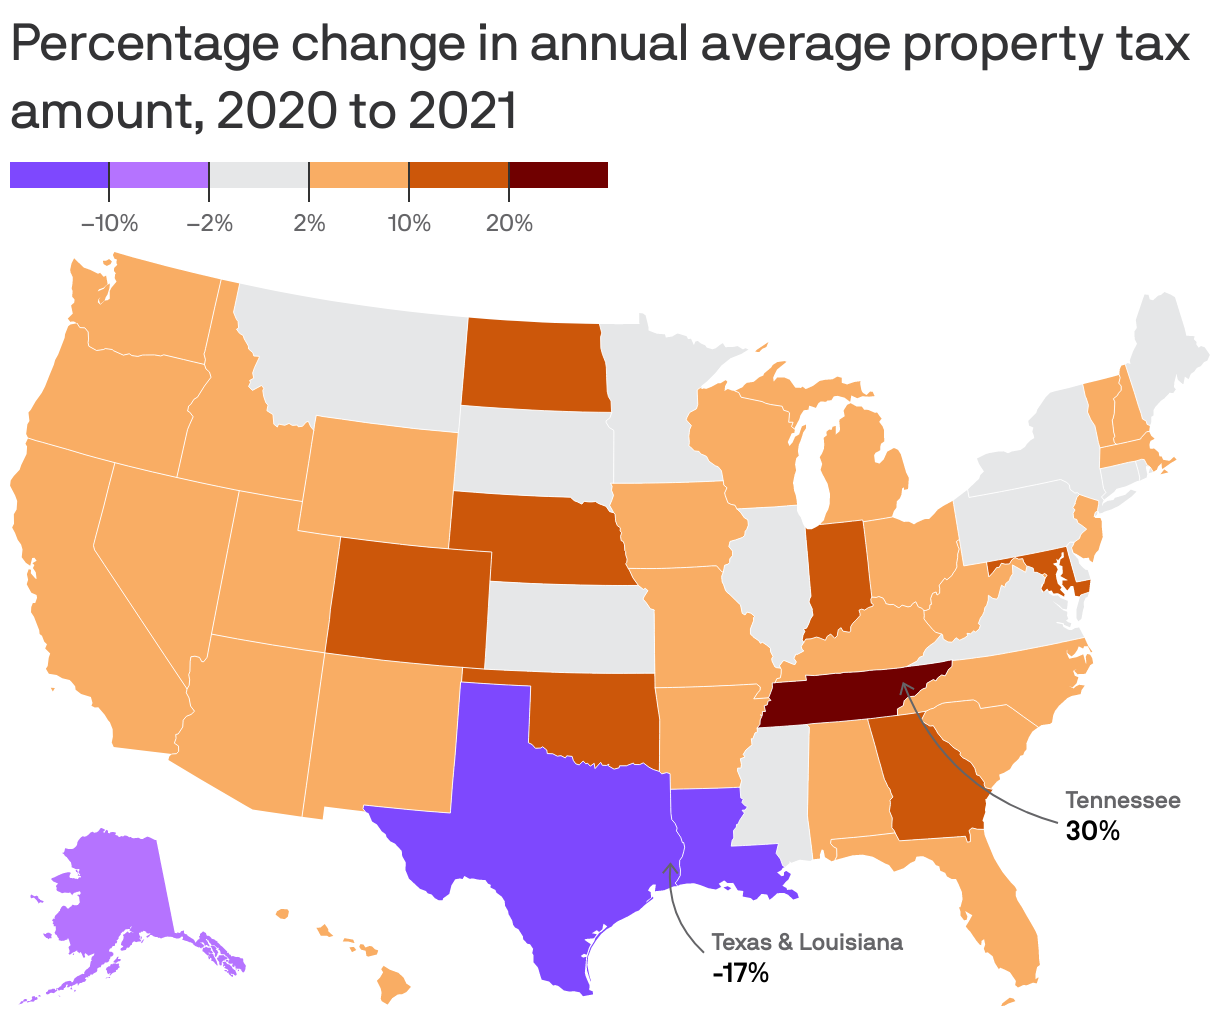 Percentage change in annual average property tax amount, 2020-2021